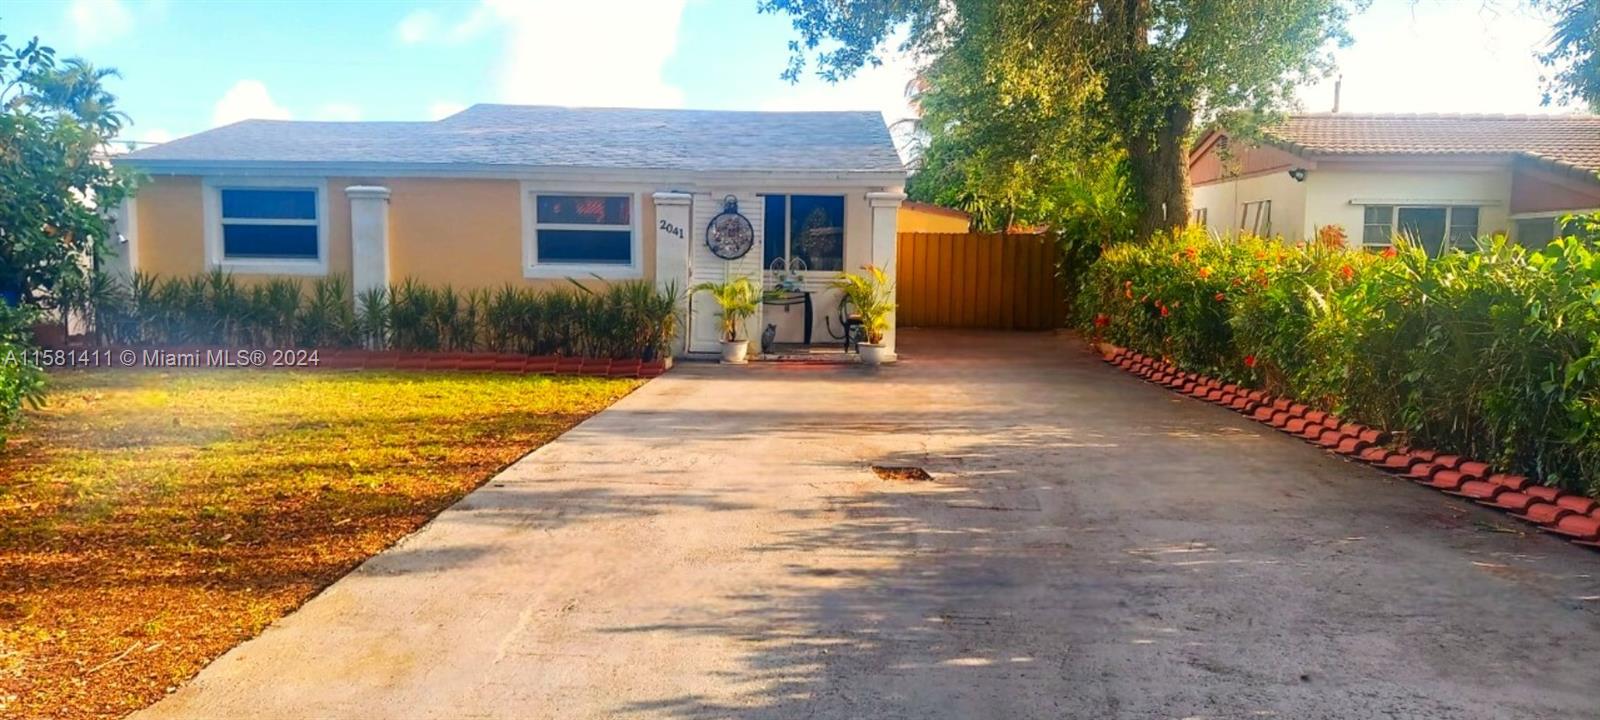 Property for Sale at 2041 Ne 182nd St St, North Miami Beach, Miami-Dade County, Florida - Bedrooms: 2 
Bathrooms: 2  - $638,500